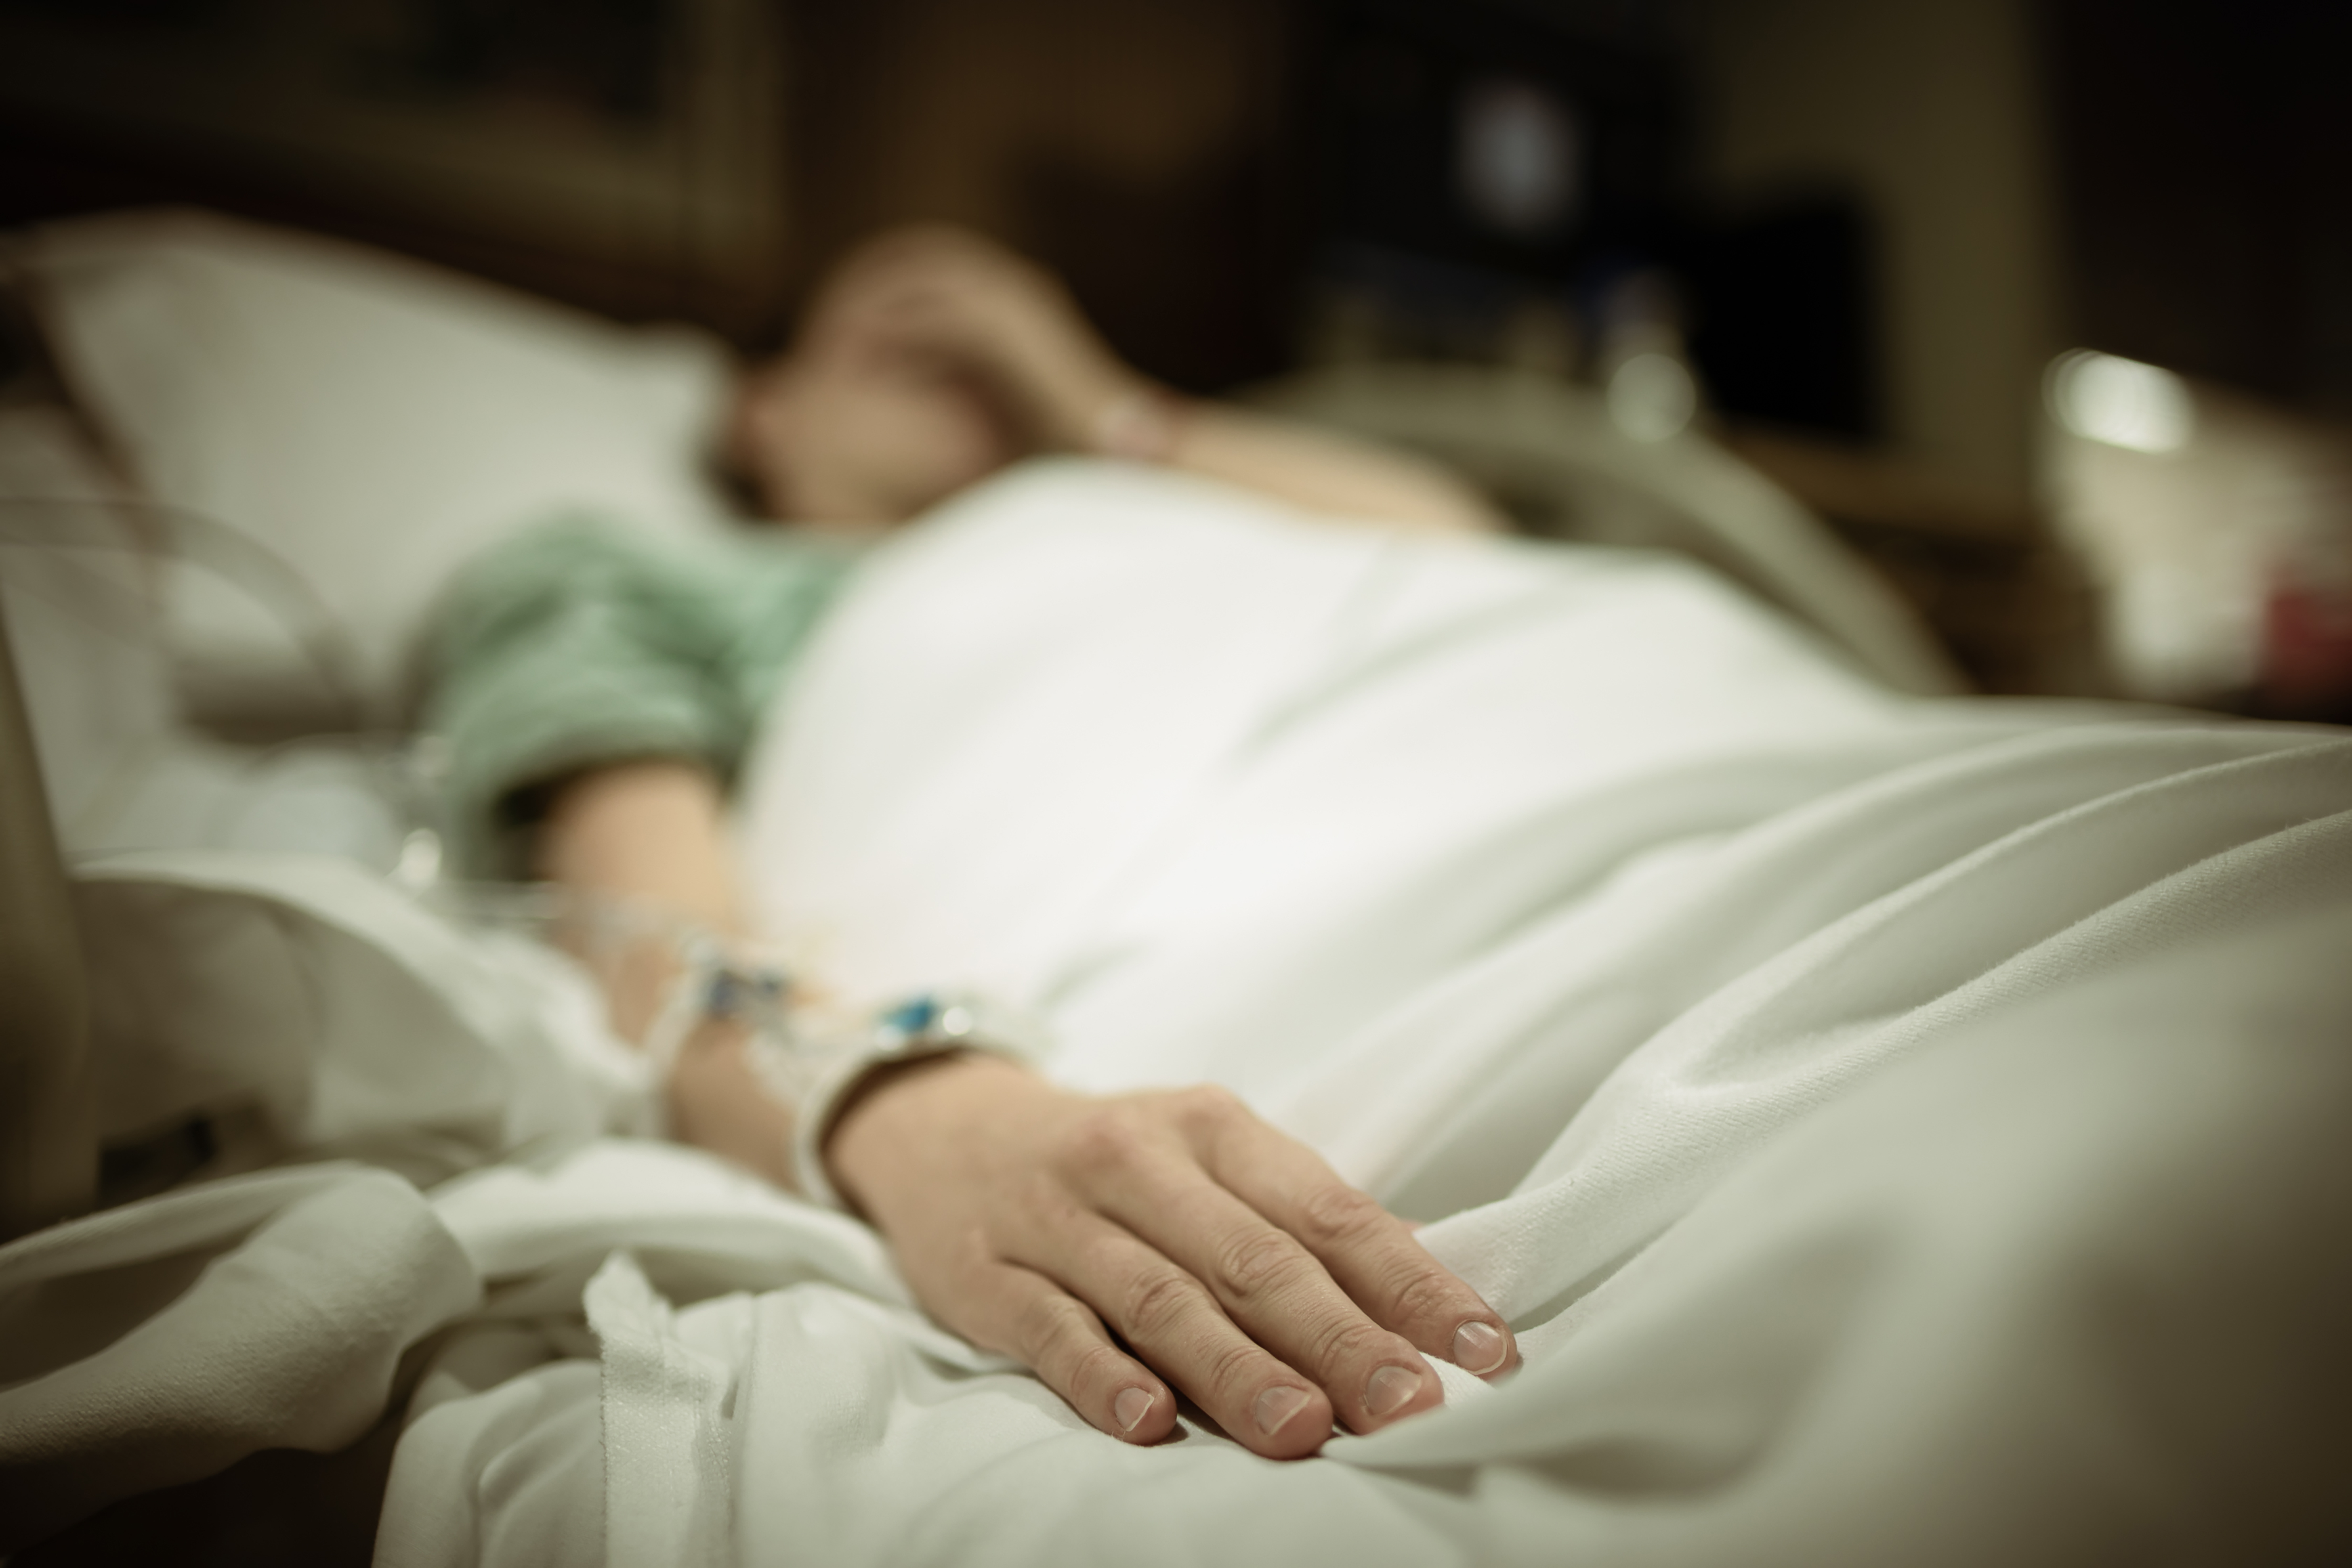 Sad woman in hospital bed | Source: Shutterstock